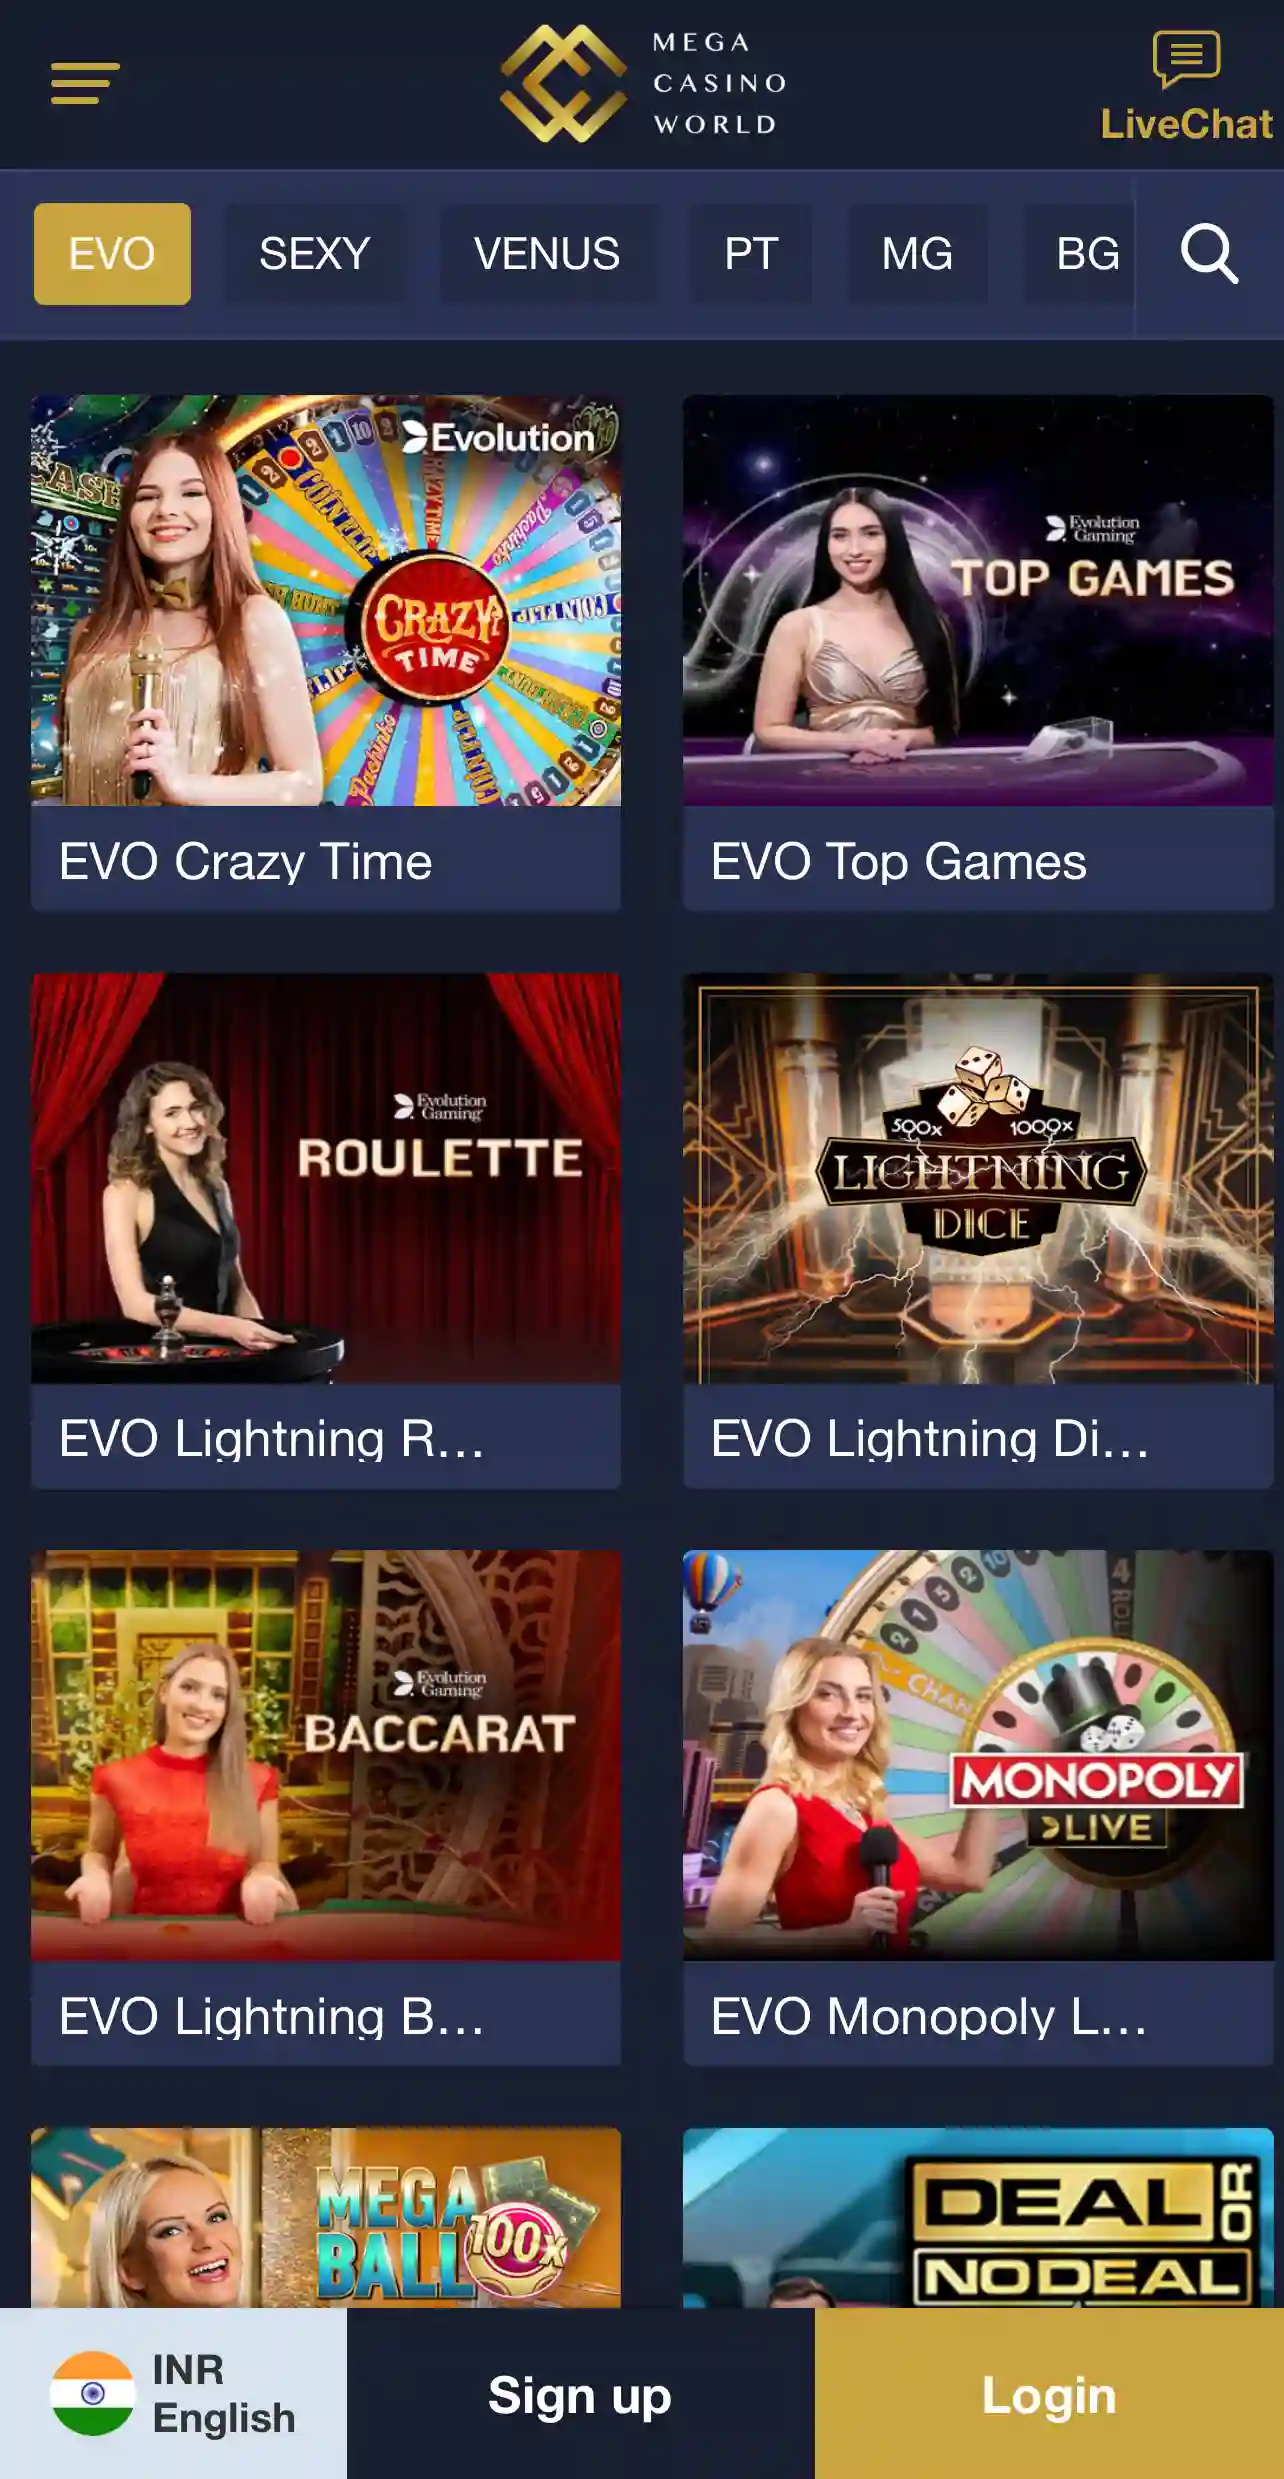 Casino games have become even more interesting with the Mega Casino World app.